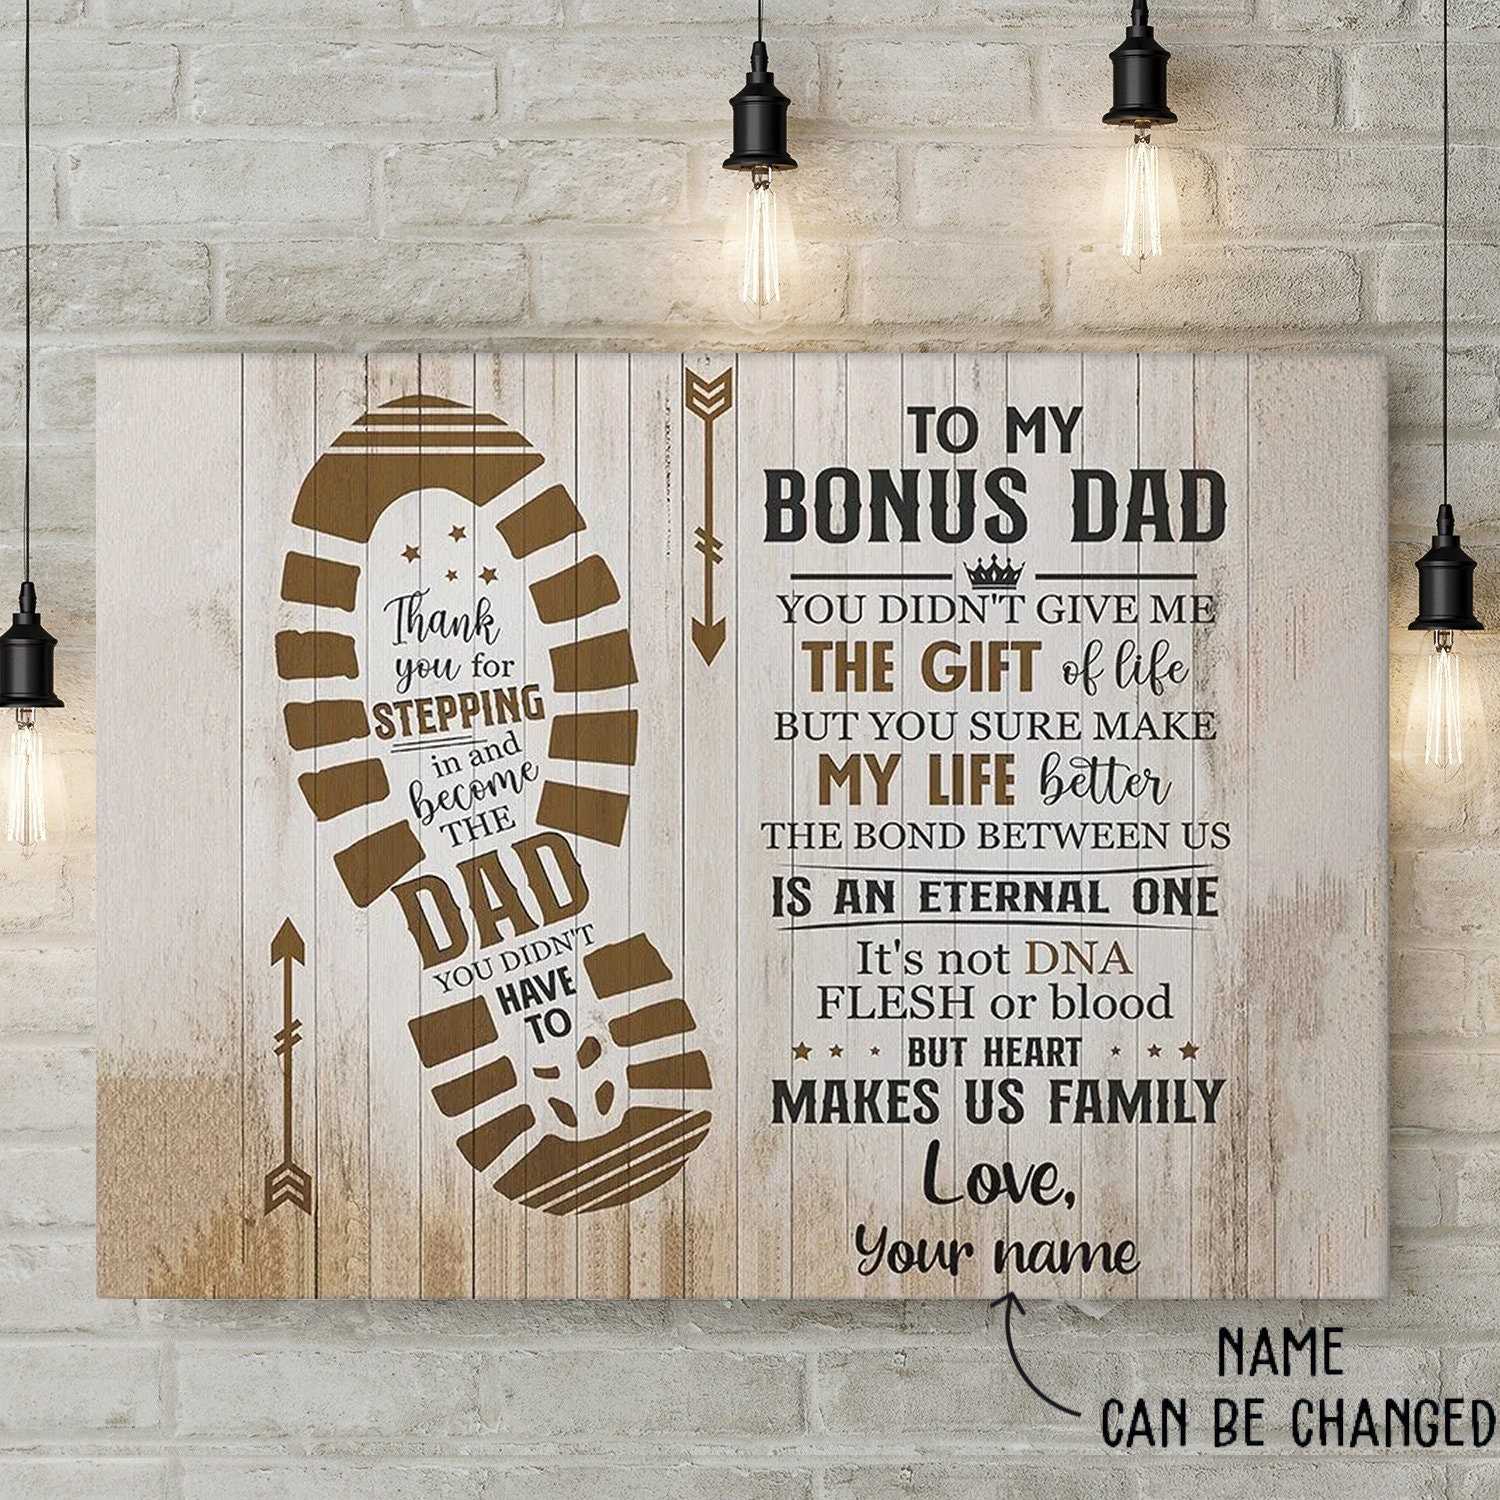 Personalized To My Bonus Dad Canvas Thank You For Stepping In And Become The Didn't Have Be Print Fathers Day Gift Stepdad